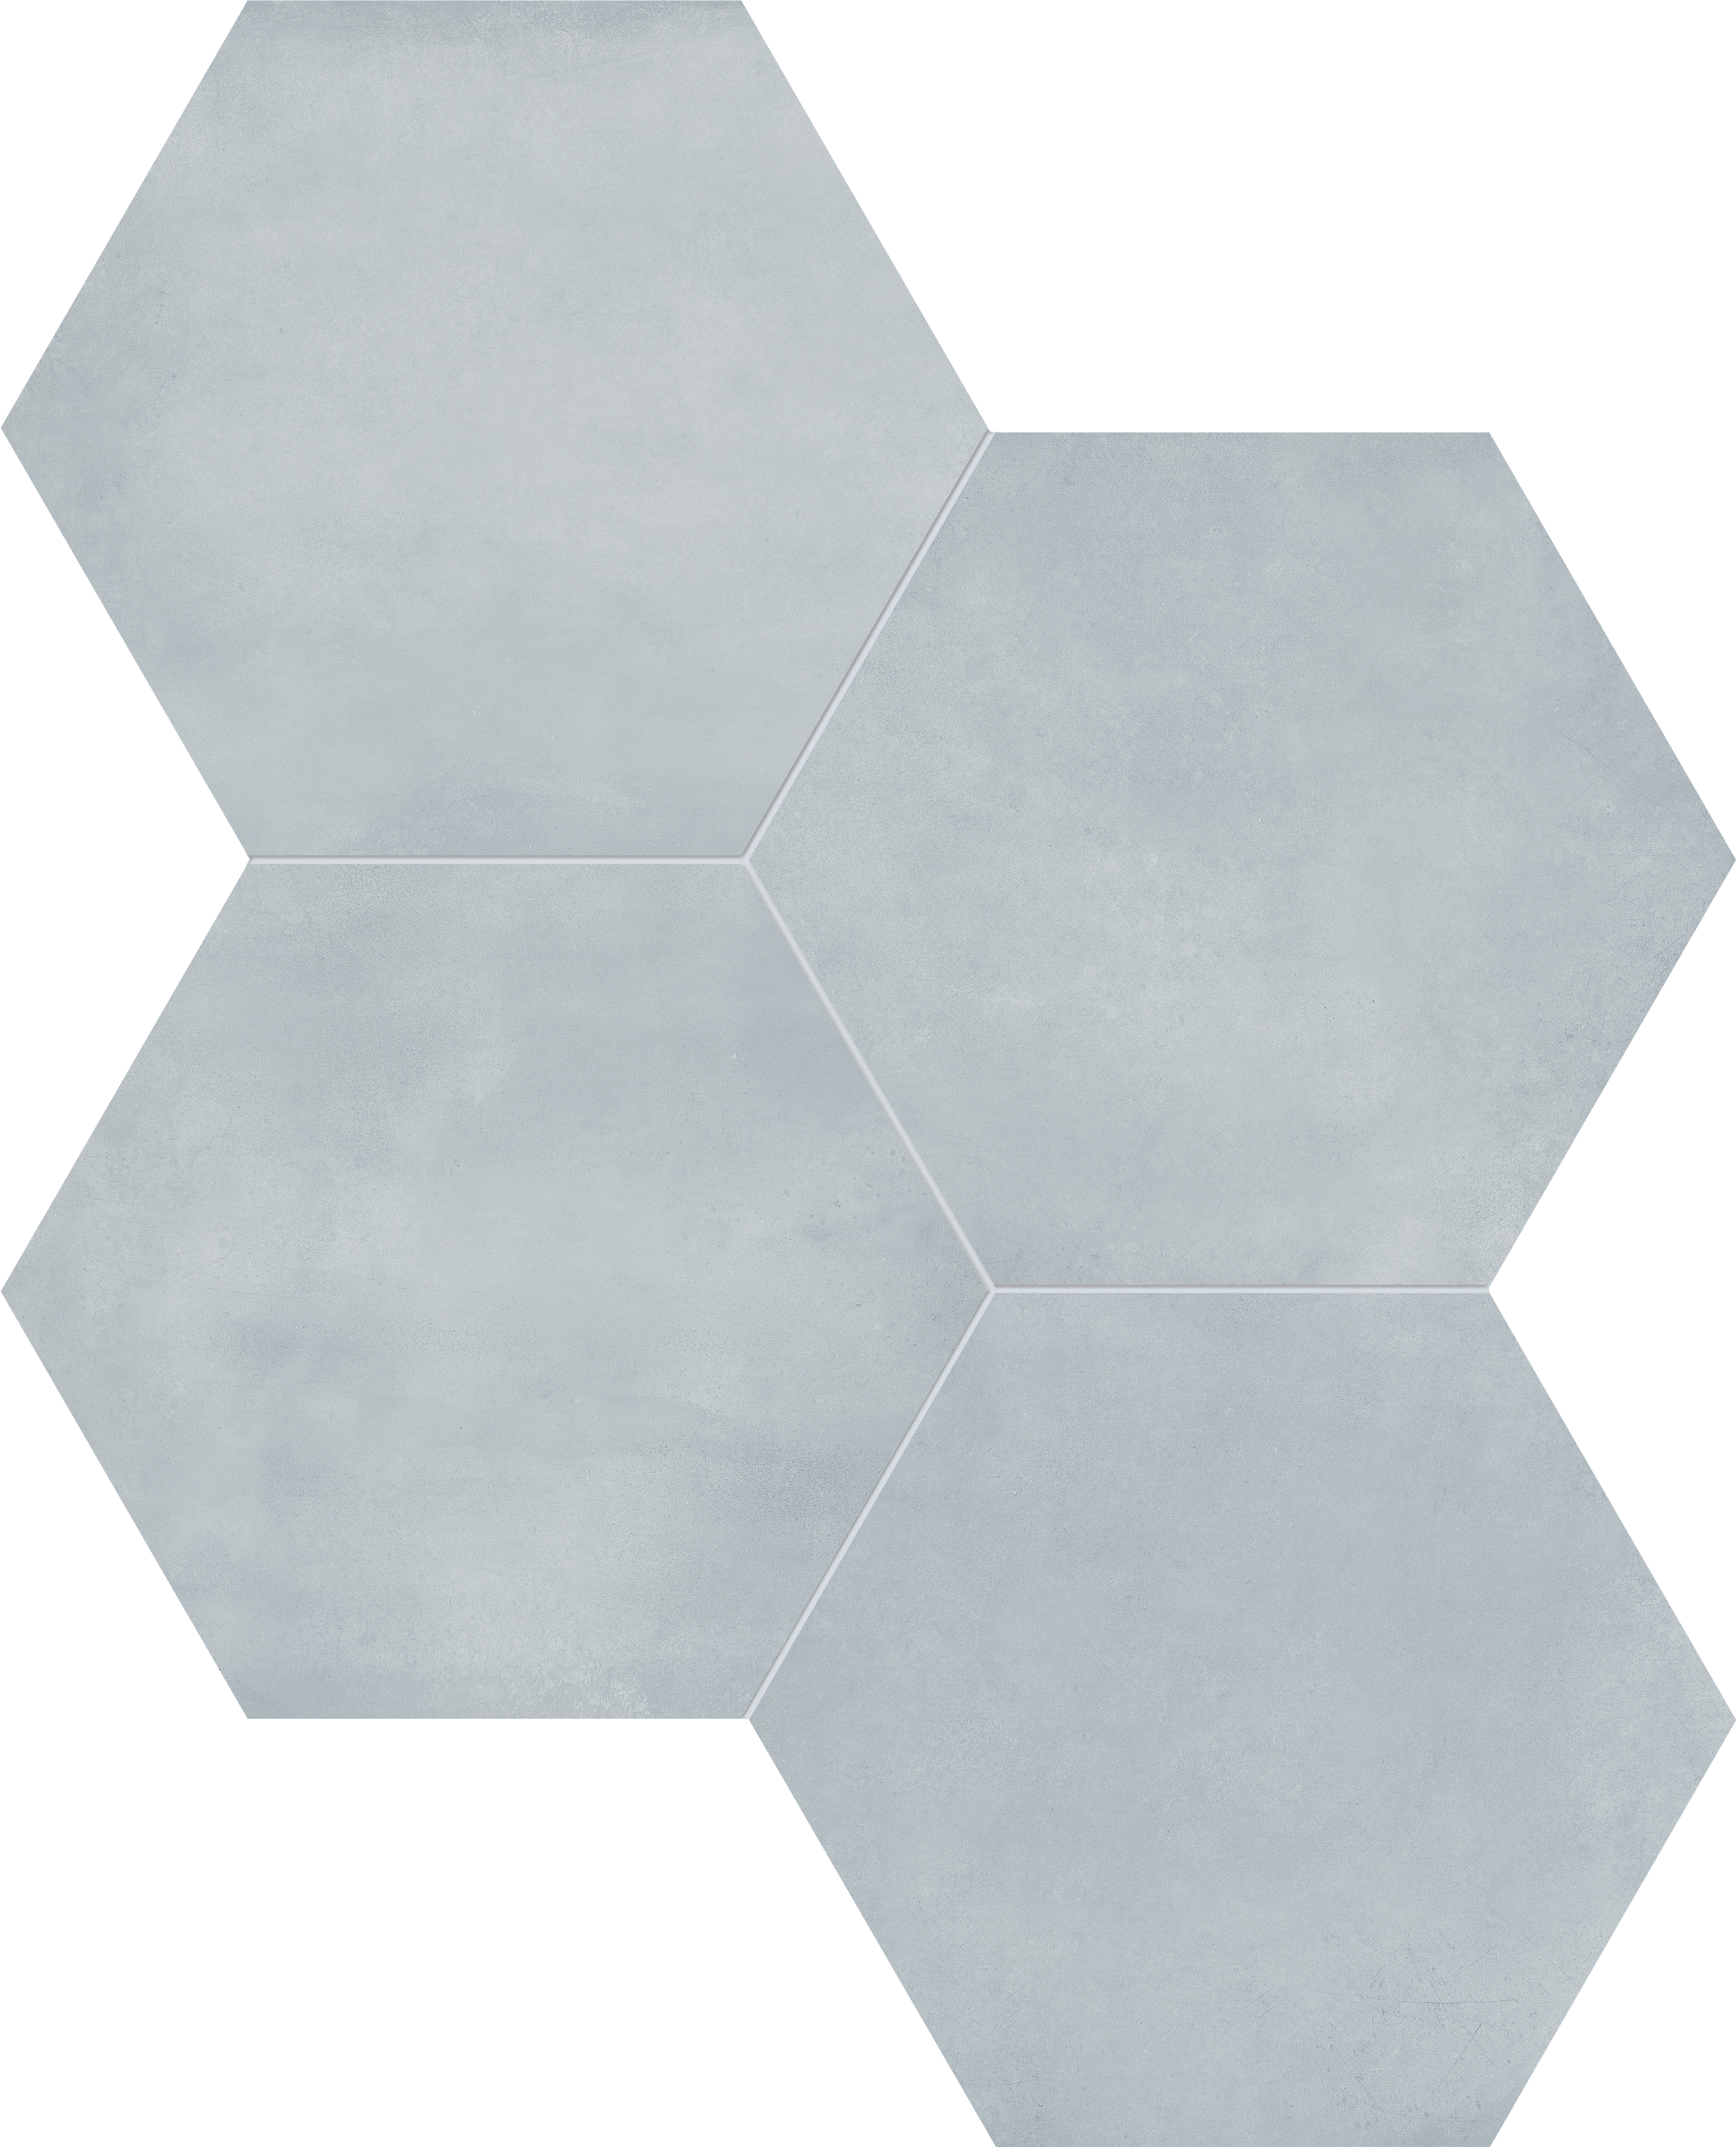 tide pattern glazed porcelain field tile from form anatolia collection distributed by surface group international matte finish pressed edge 7-inch hexagon shape